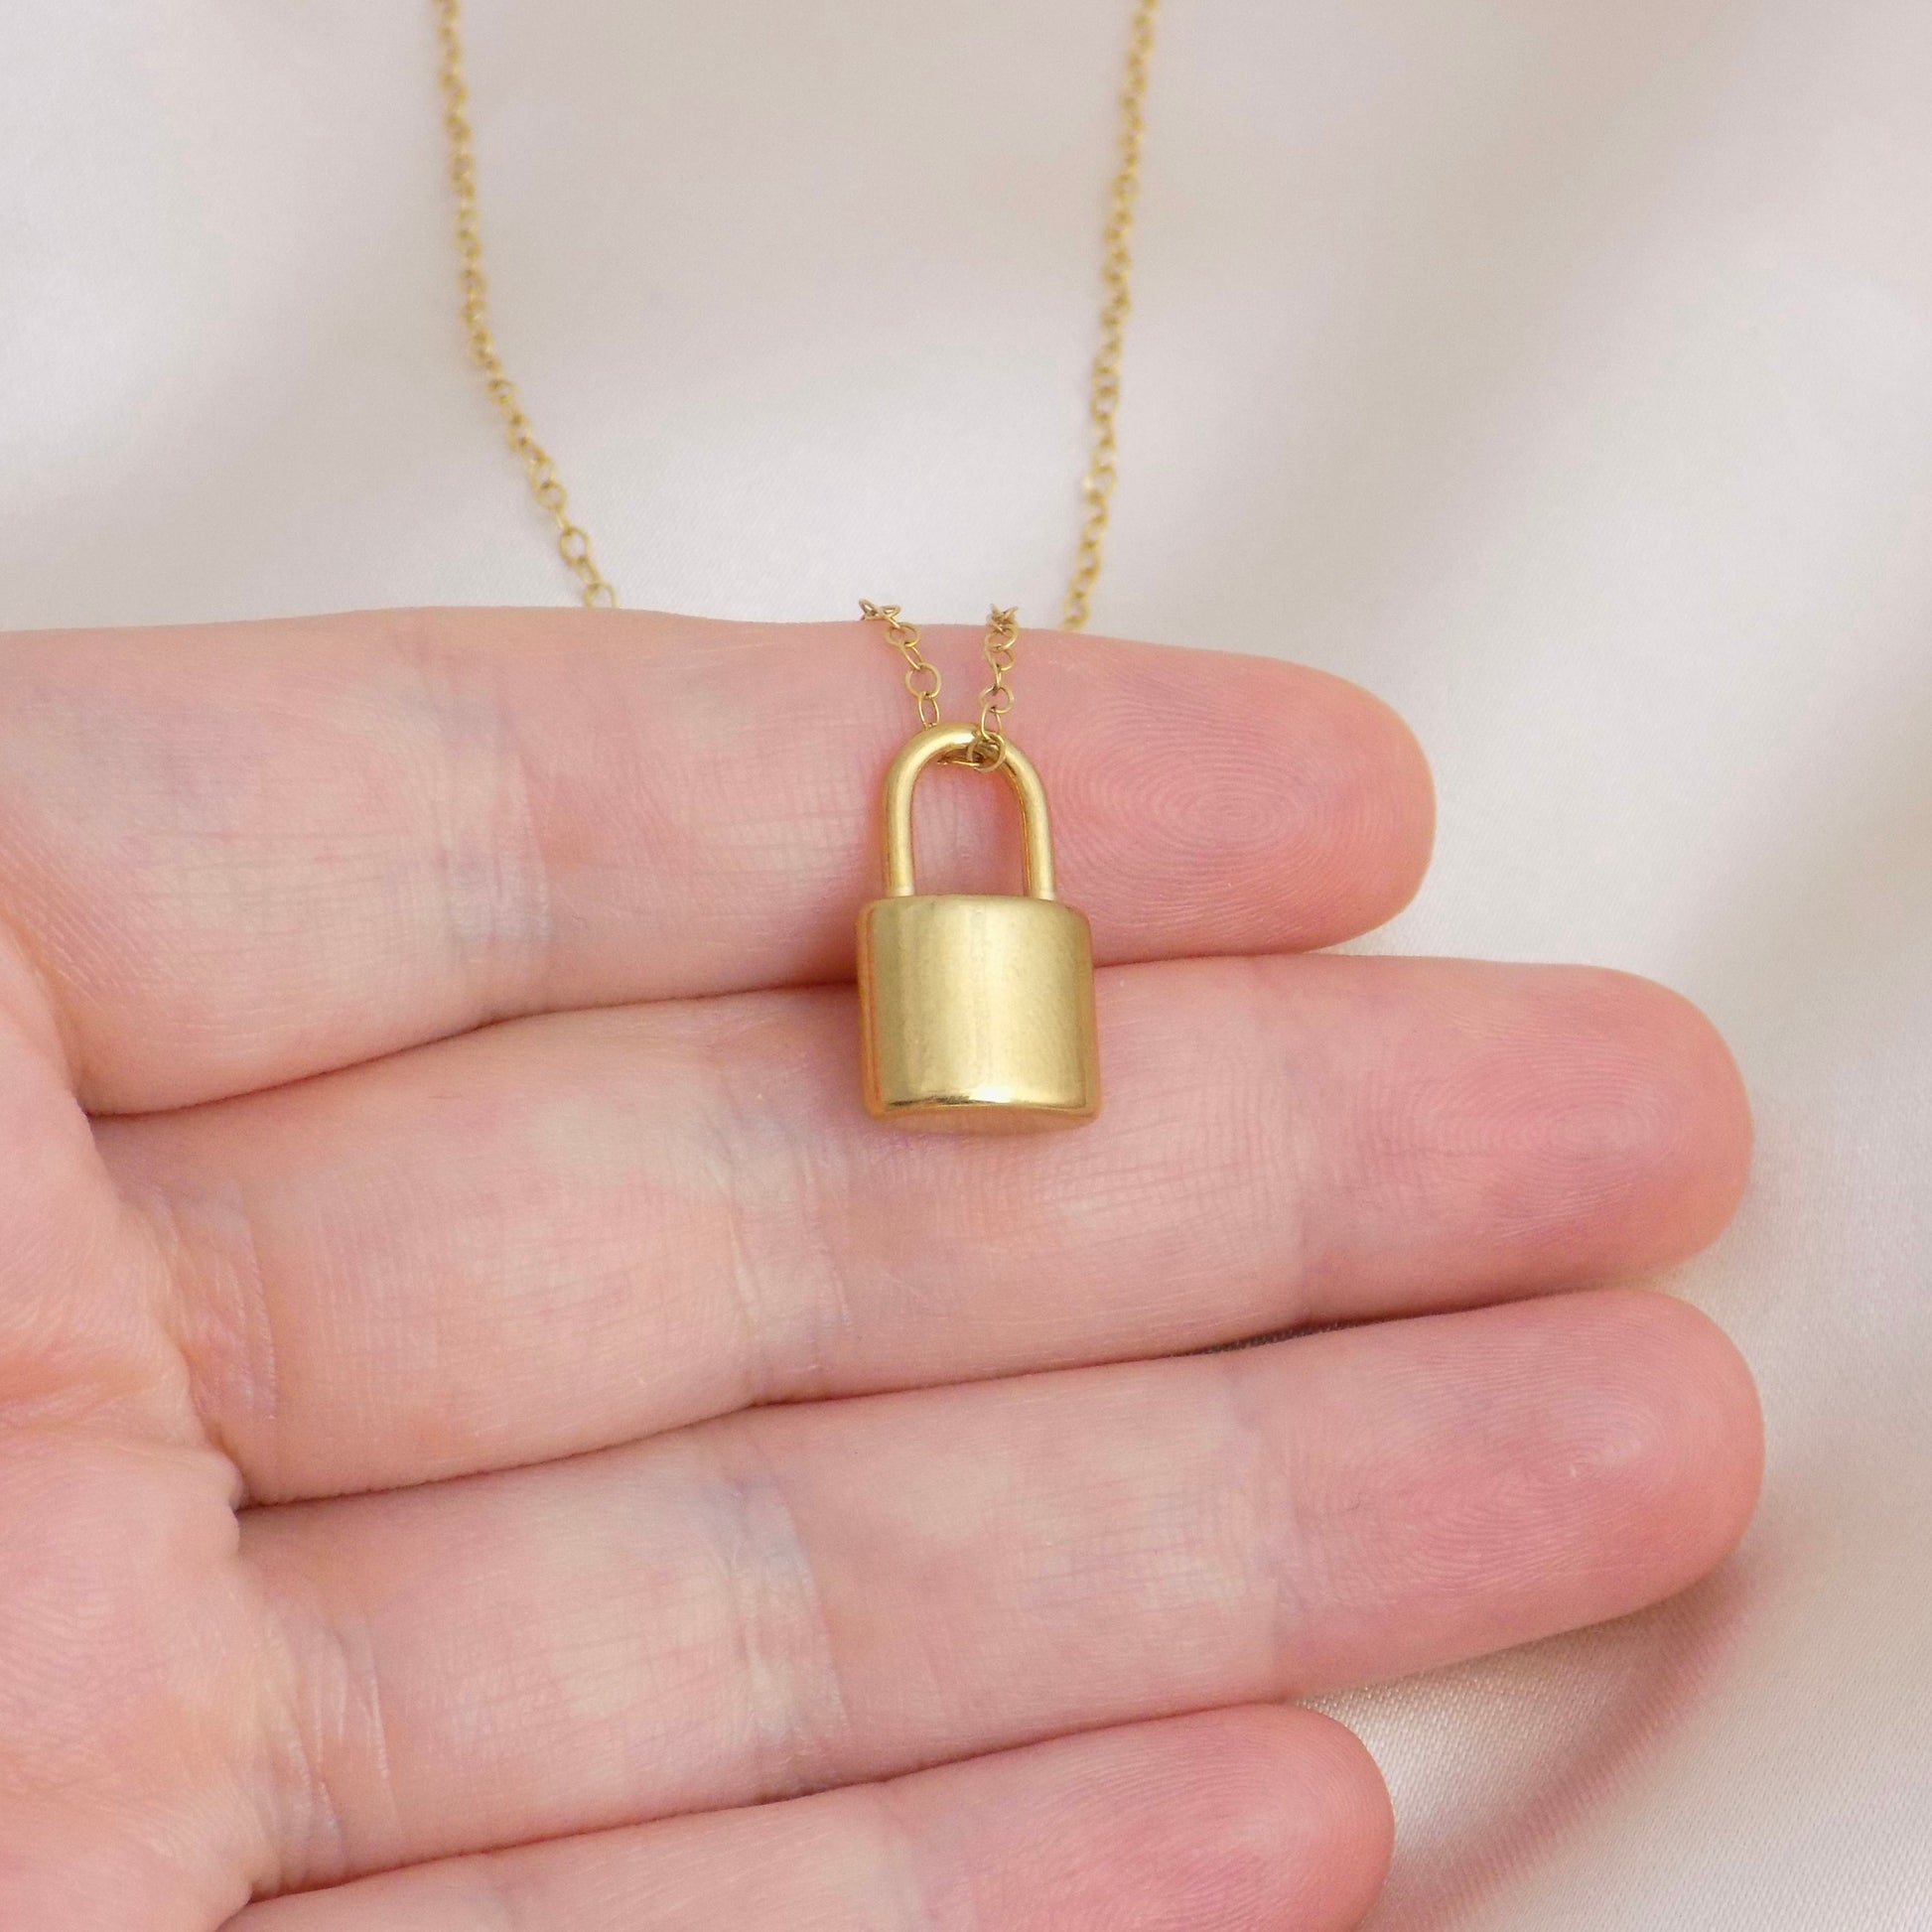 Dainty Gold Lock Necklace Padlock Necklace Gold Stainless 